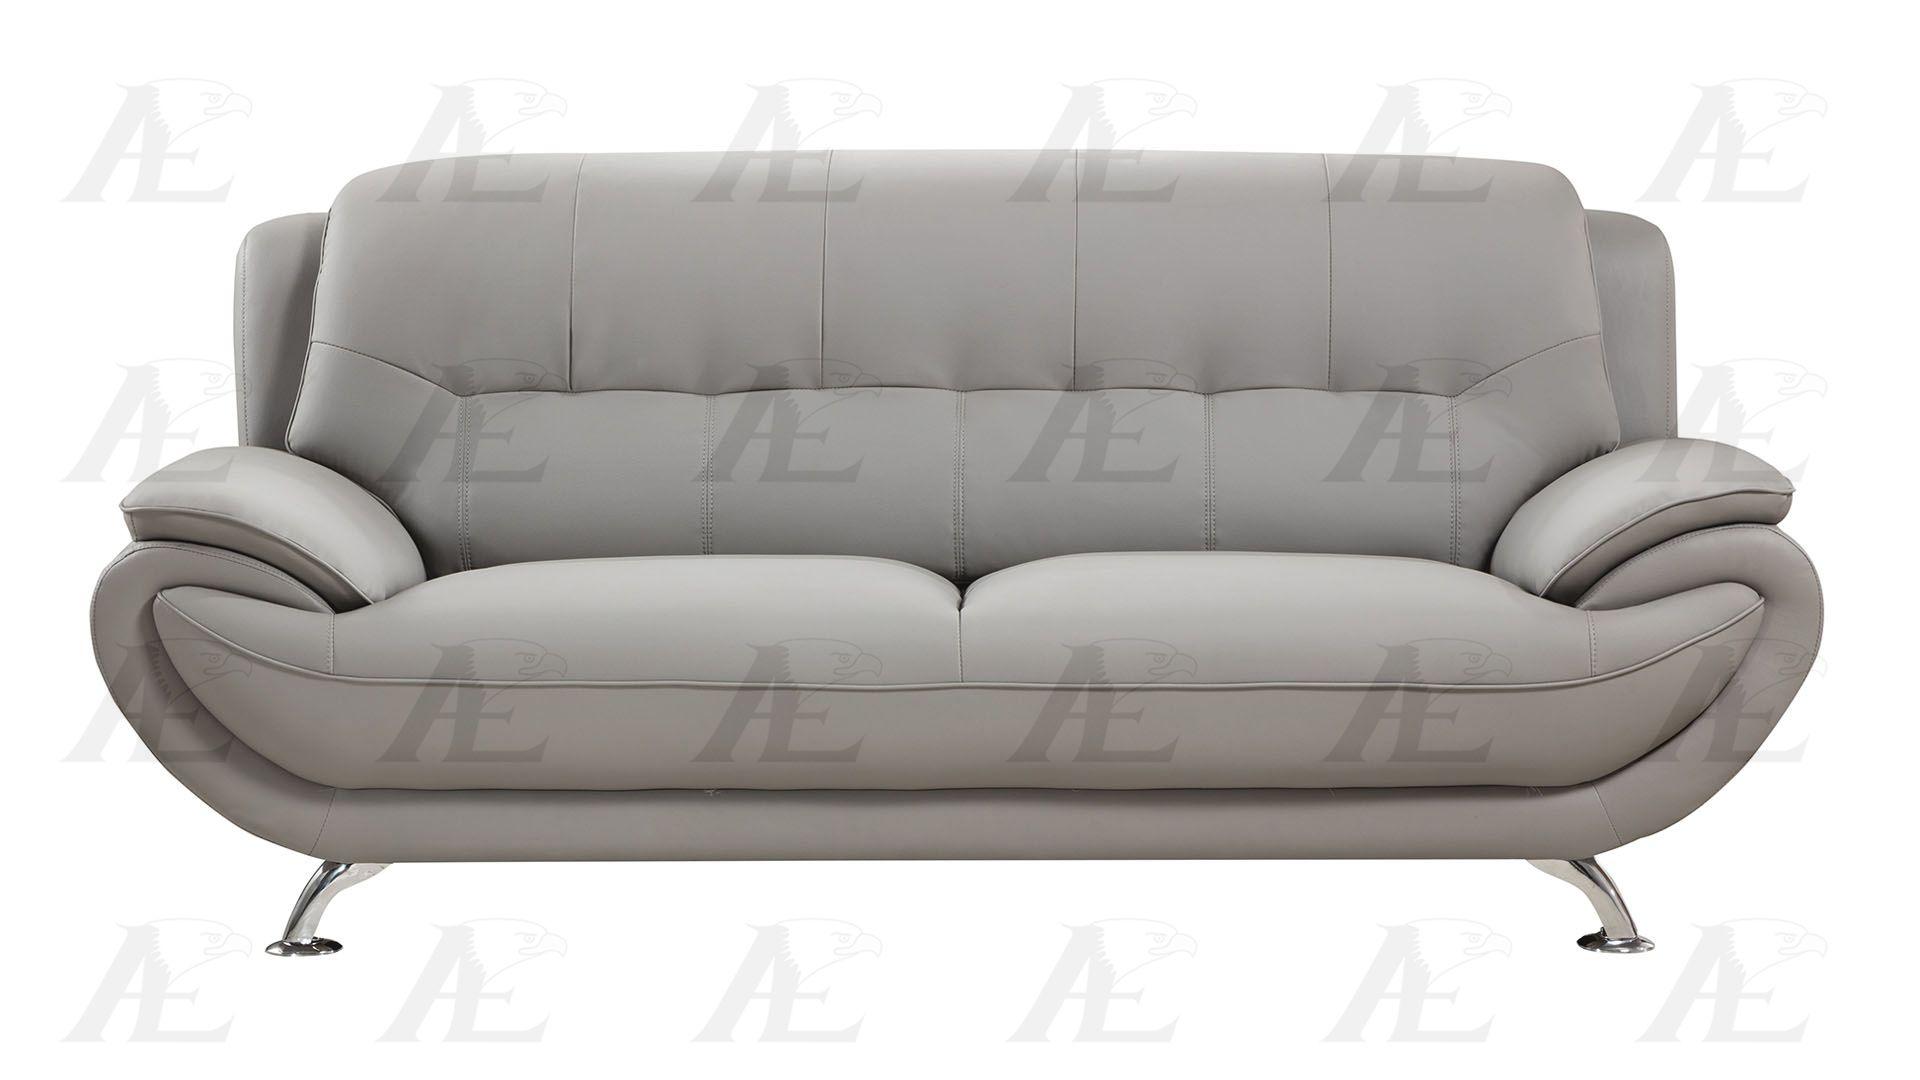 

    
American Eagle AE208 Gray Bonded Leather Living Room Sofa Set 3pcs in Modern Style
